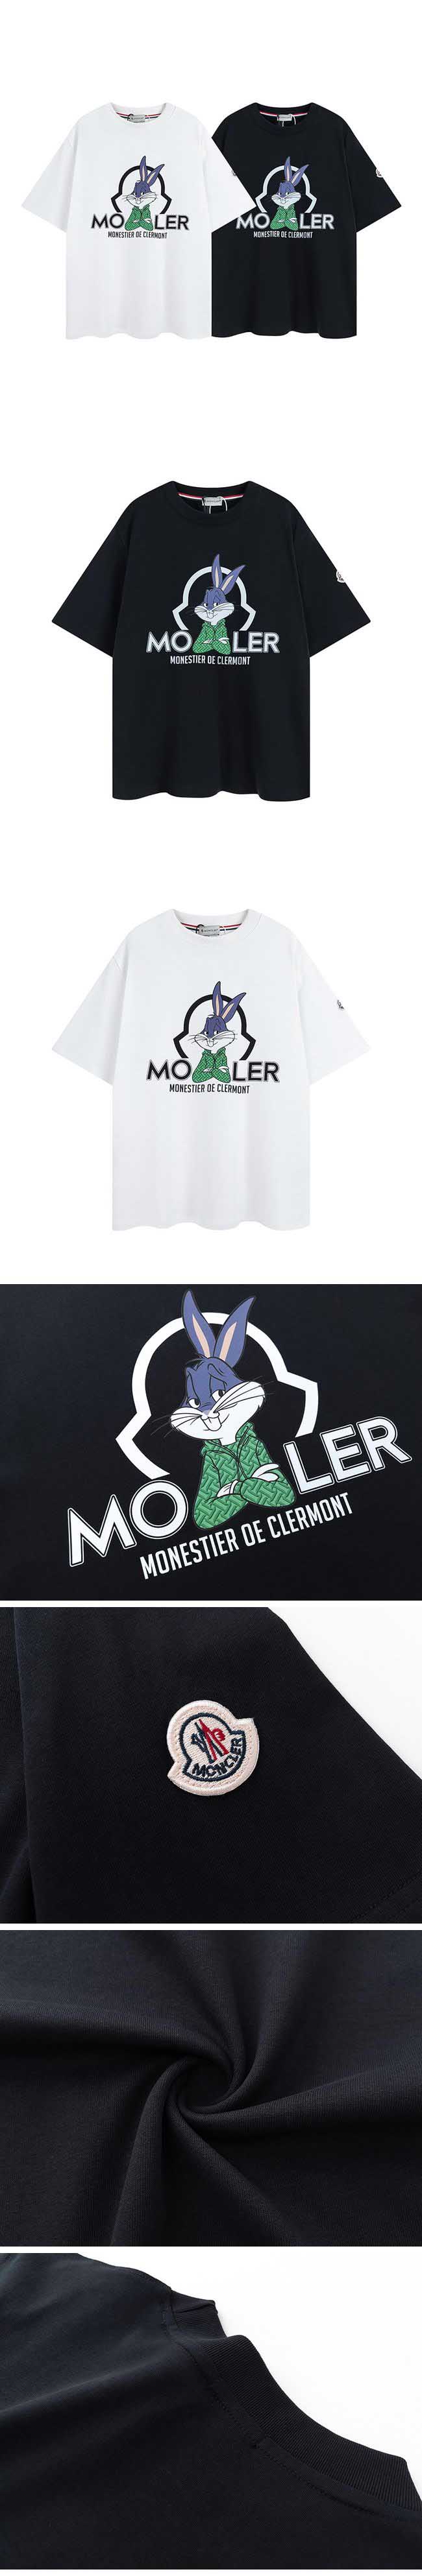 Moncler x Bugs Bunny Parker Print Tee モンクレール x バッグス バニー パーカー プリント Tシャツ